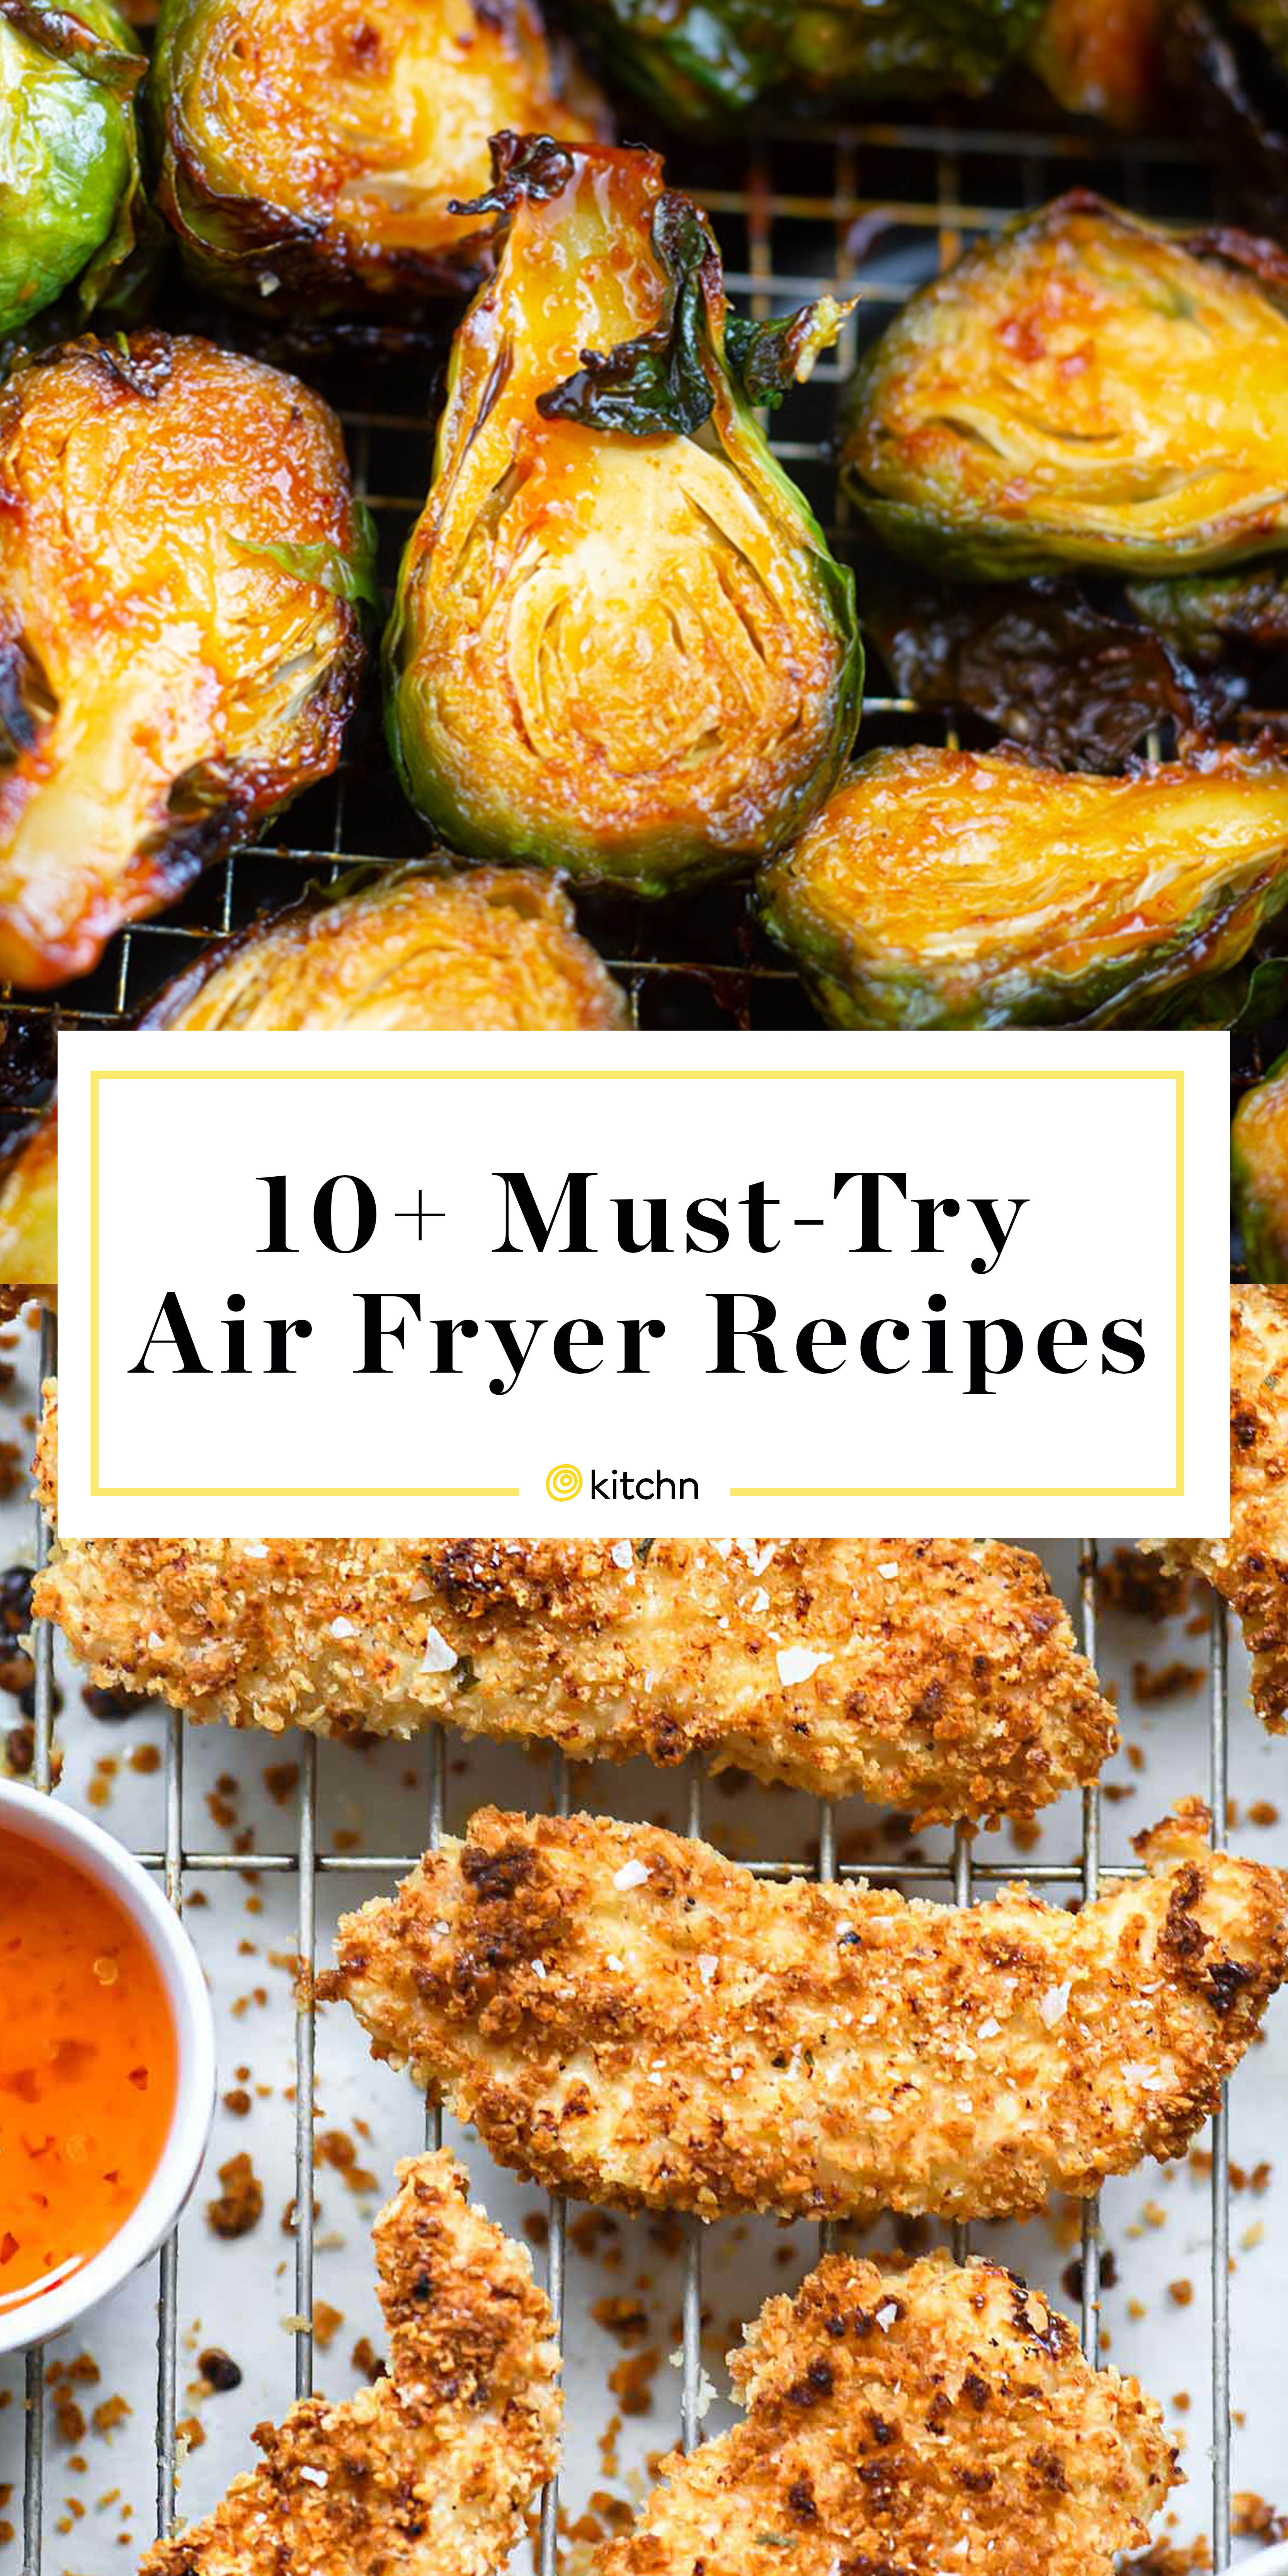 Recipes for airfryer